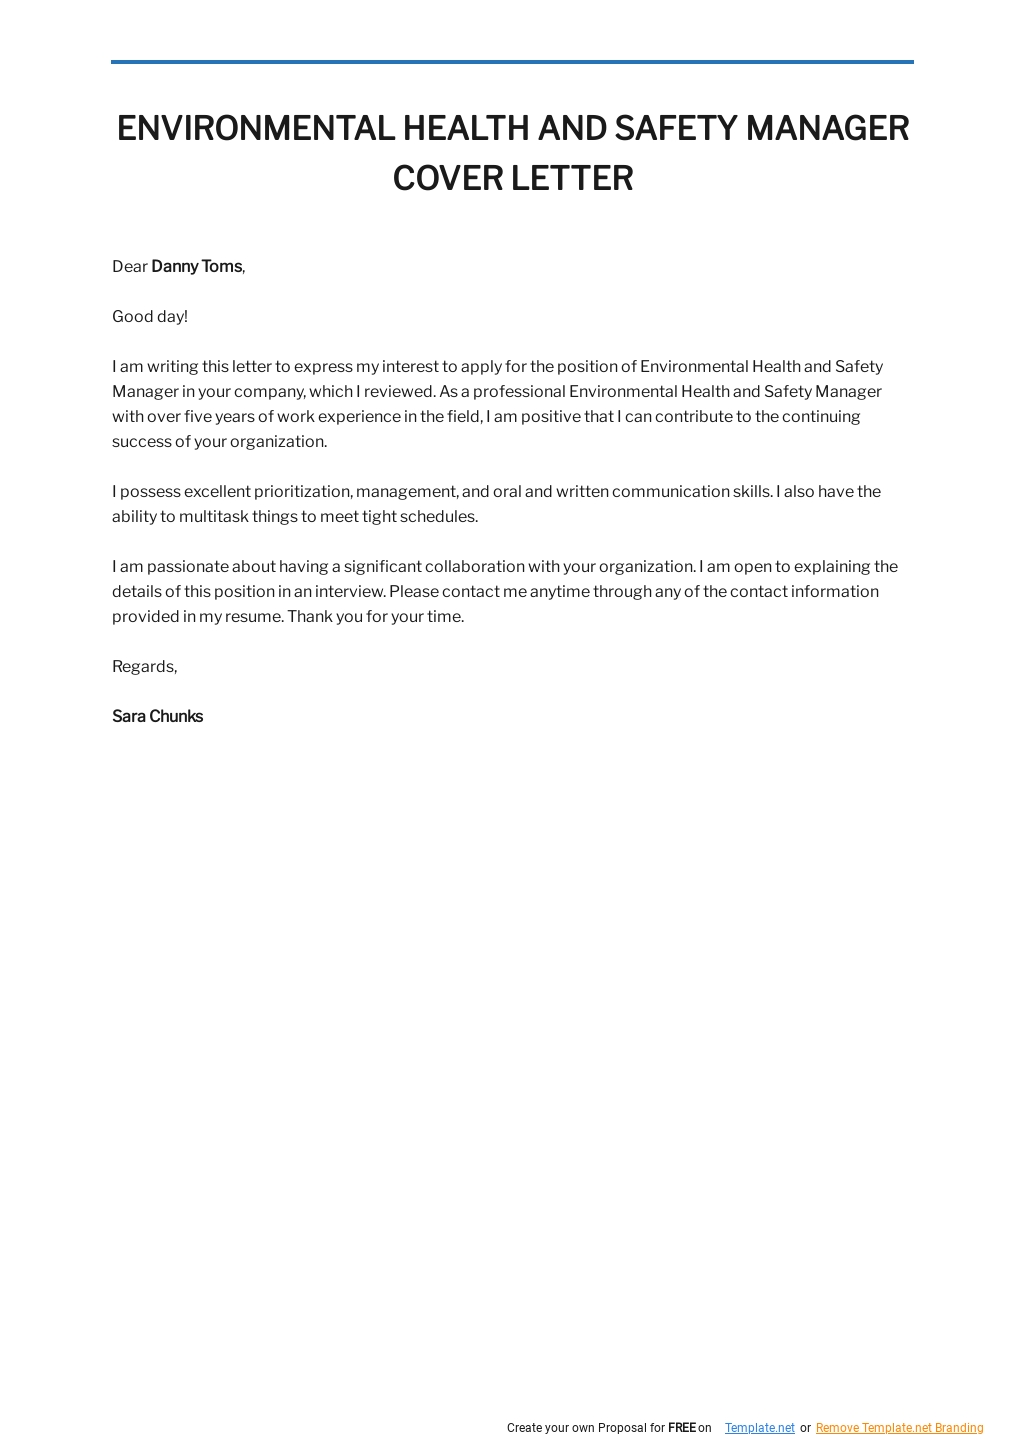 Environmental Health And Safety Manager Sample Cover Letter Template.jpe